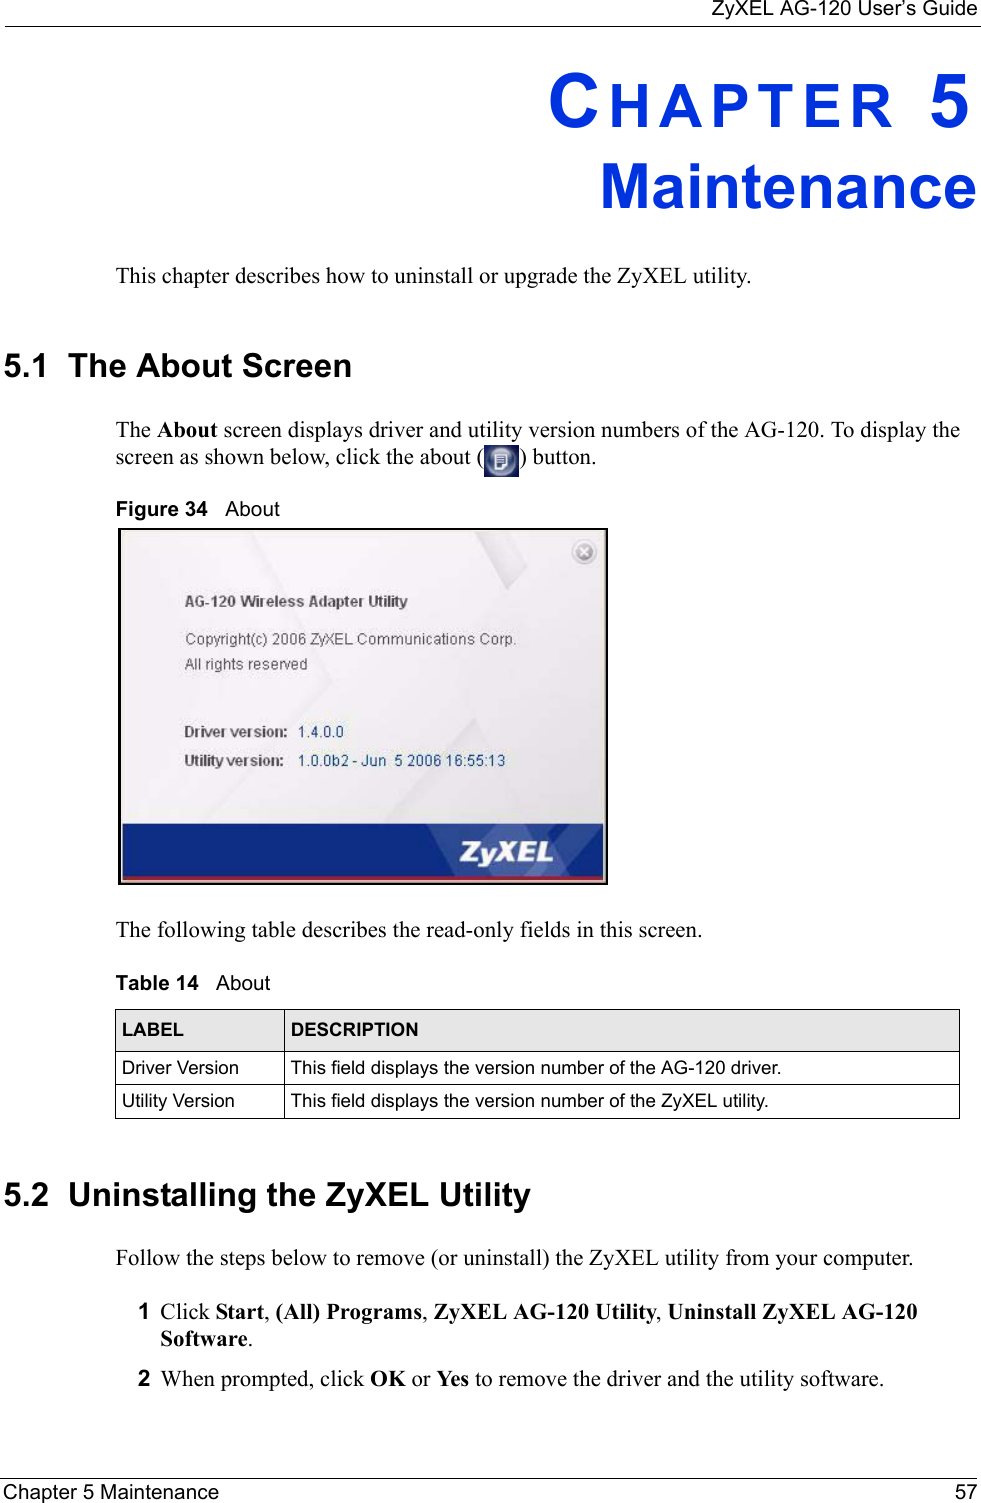 ZyXEL AG-120 User’s GuideChapter 5 Maintenance 57CHAPTER 5MaintenanceThis chapter describes how to uninstall or upgrade the ZyXEL utility.5.1  The About Screen The About screen displays driver and utility version numbers of the AG-120. To display the screen as shown below, click the about ( ) button.Figure 34   About The following table describes the read-only fields in this screen. 5.2  Uninstalling the ZyXEL Utility Follow the steps below to remove (or uninstall) the ZyXEL utility from your computer.1Click Start, (All) Programs, ZyXEL AG-120 Utility, Uninstall ZyXEL AG-120 Software.2When prompted, click OK or Yes  to remove the driver and the utility software.Table 14   About LABEL DESCRIPTIONDriver Version This field displays the version number of the AG-120 driver.Utility Version This field displays the version number of the ZyXEL utility.